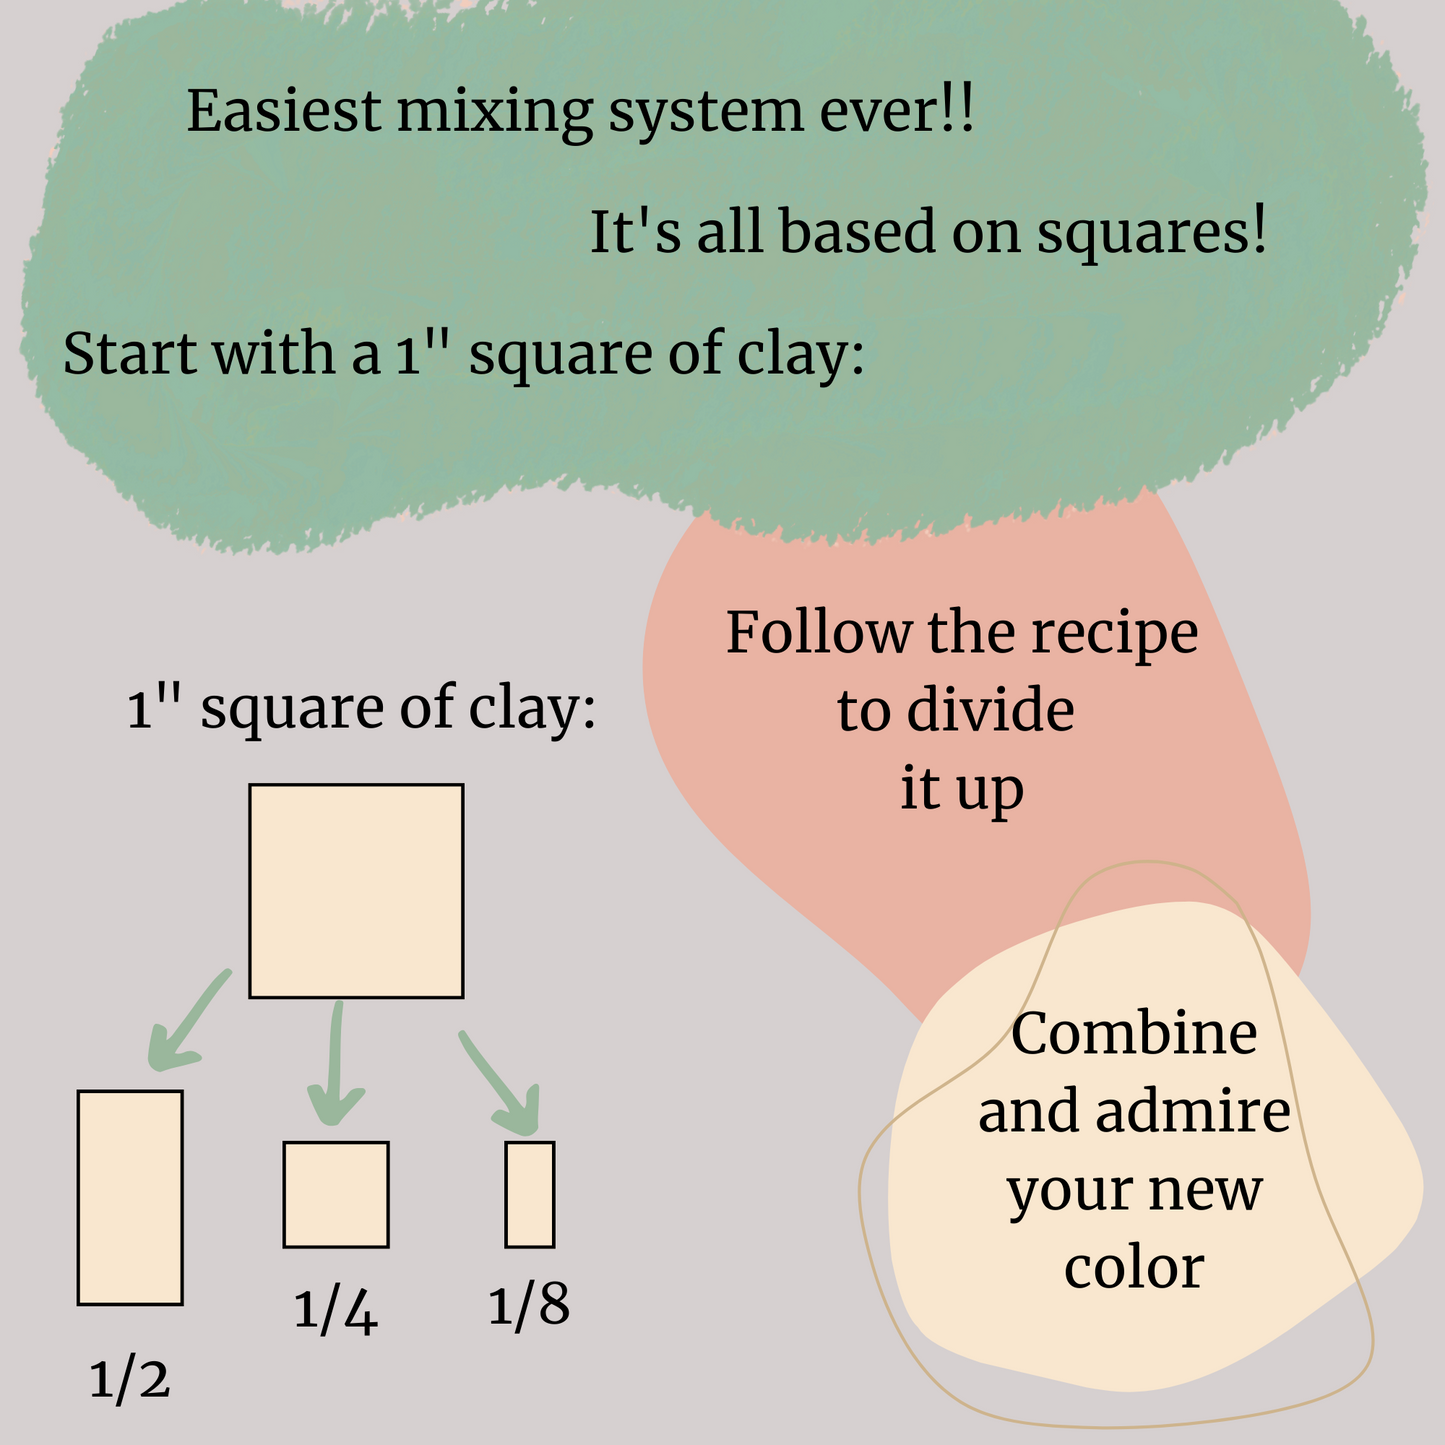 Polymer Clay Color Mixing graphic showing how each 1" square of polymer clay can be divided to form a 1/2 square block, a 1/4 square block, and a 1/8 square block.